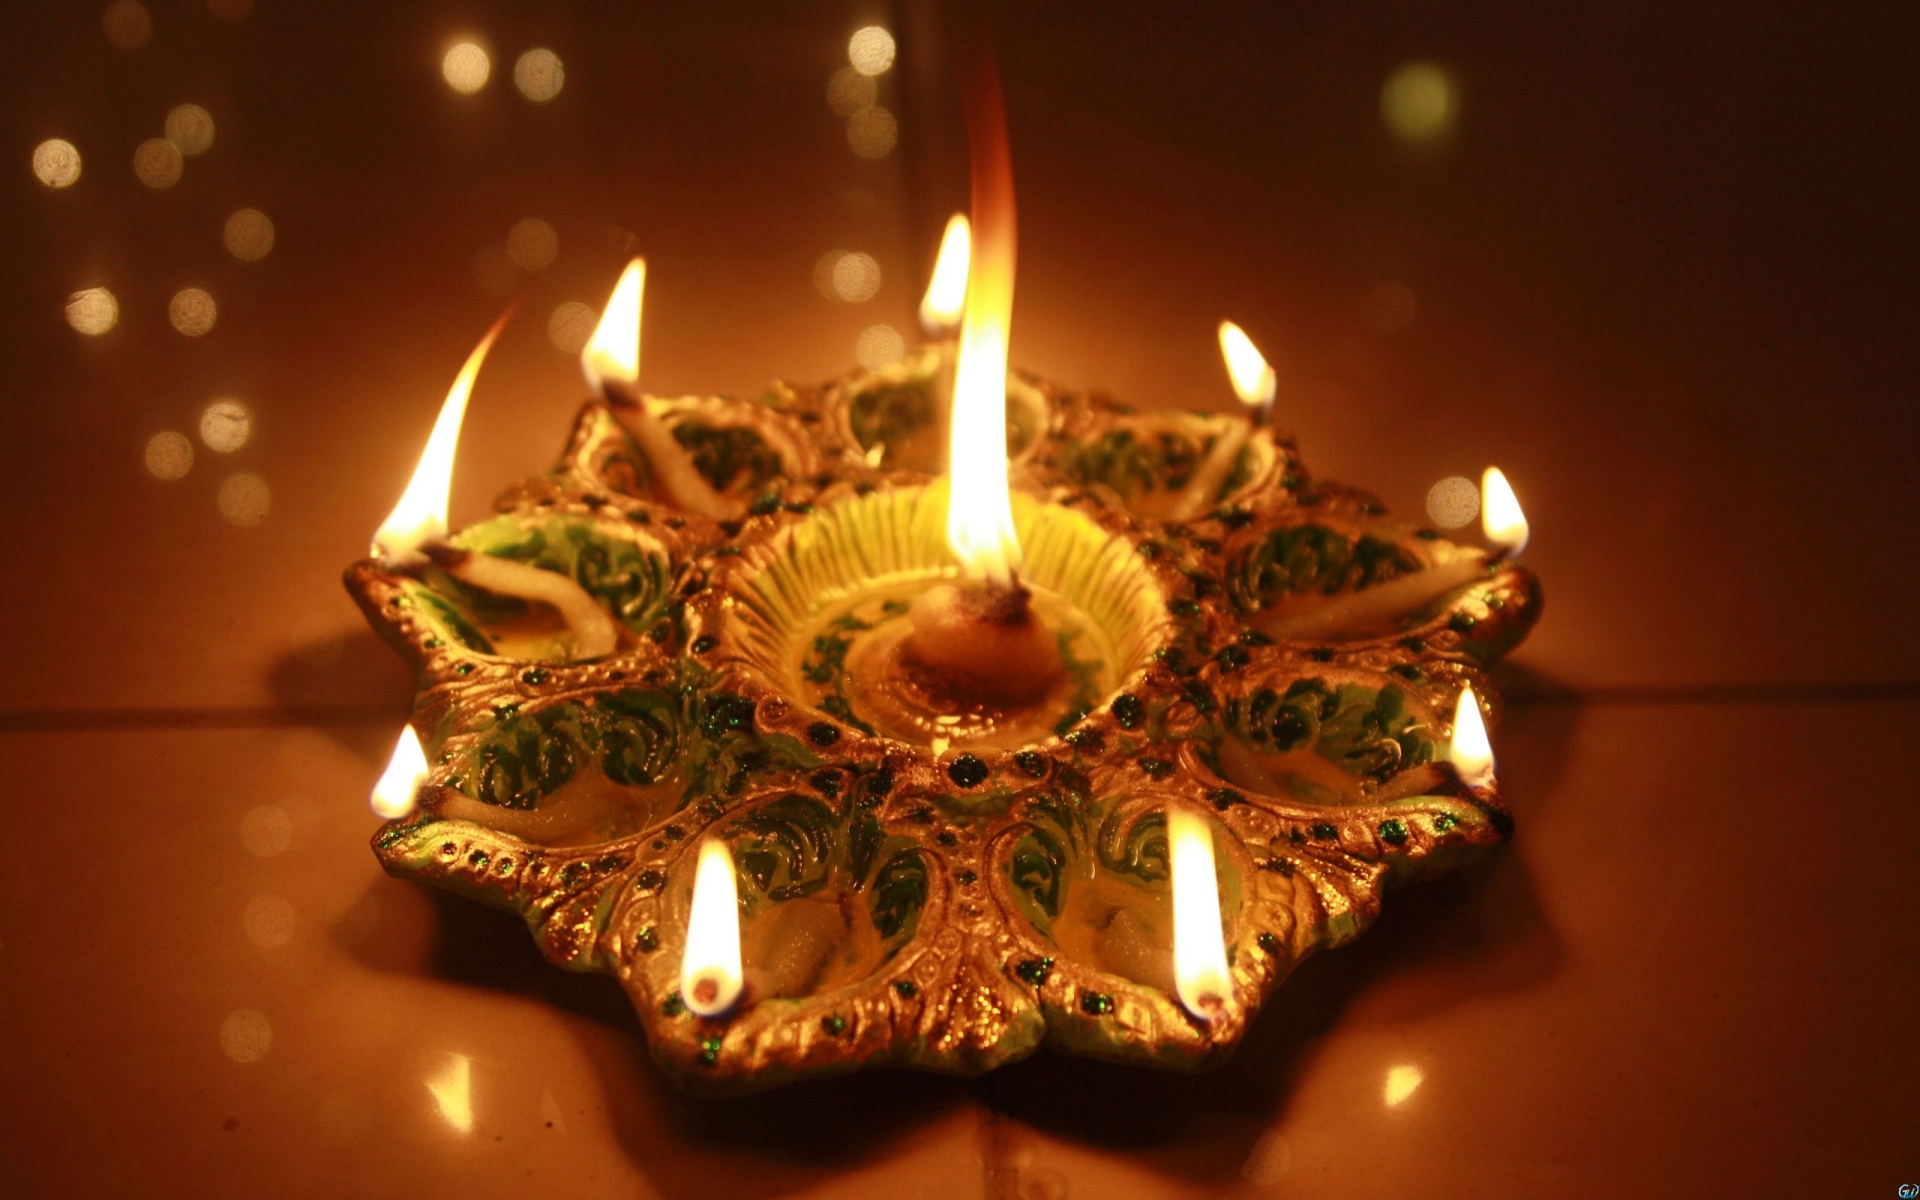 Happy Diwali Hd Images, Wallpapers, Picture & Photos - Download - Techicy